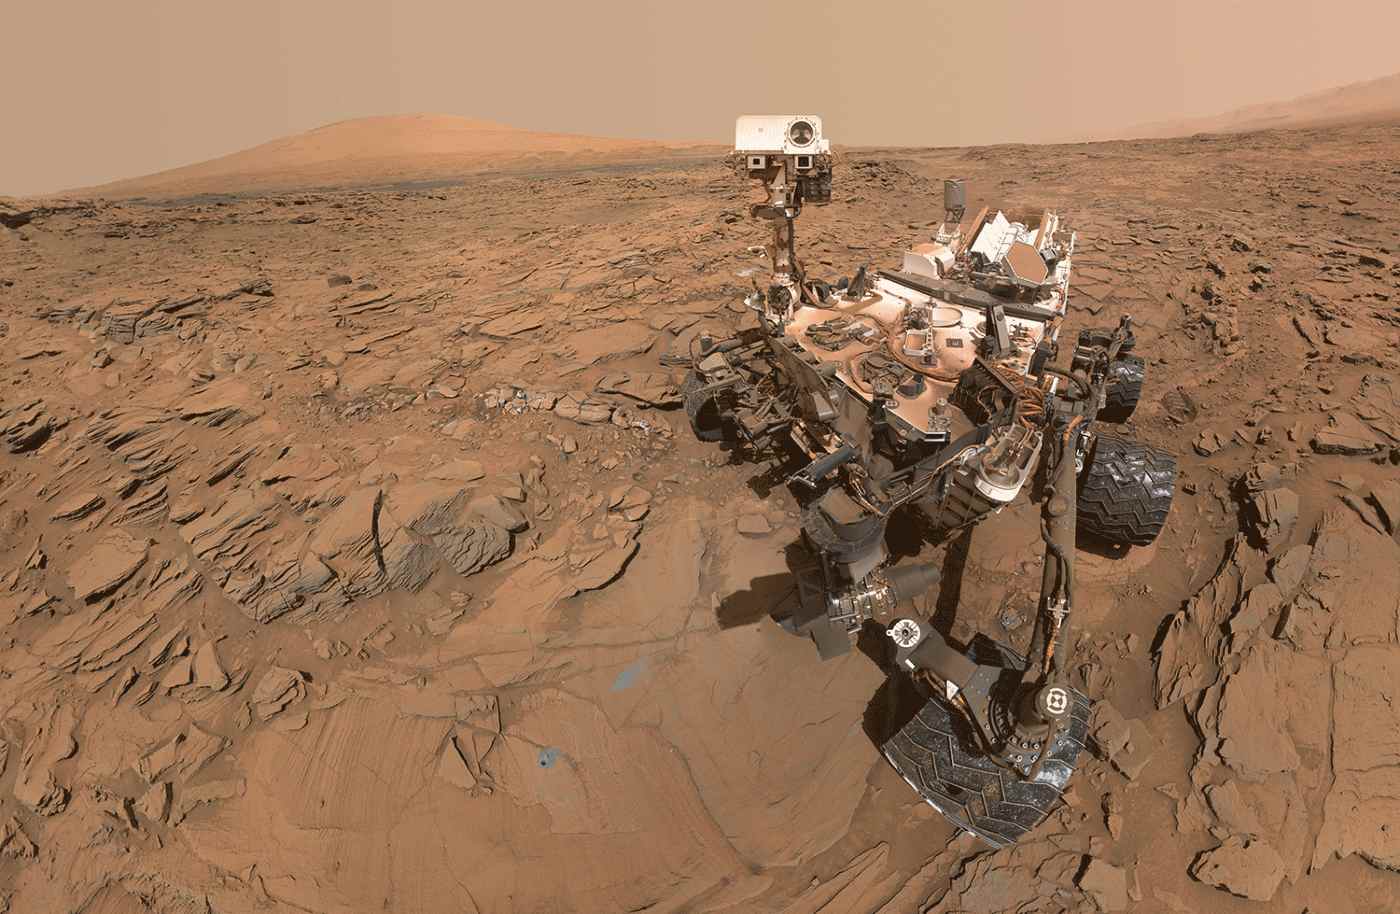 Today Marks 3000 Days on Mars For the Genius ’Curiosity Rover‘ – See NASA Celebration in Photos